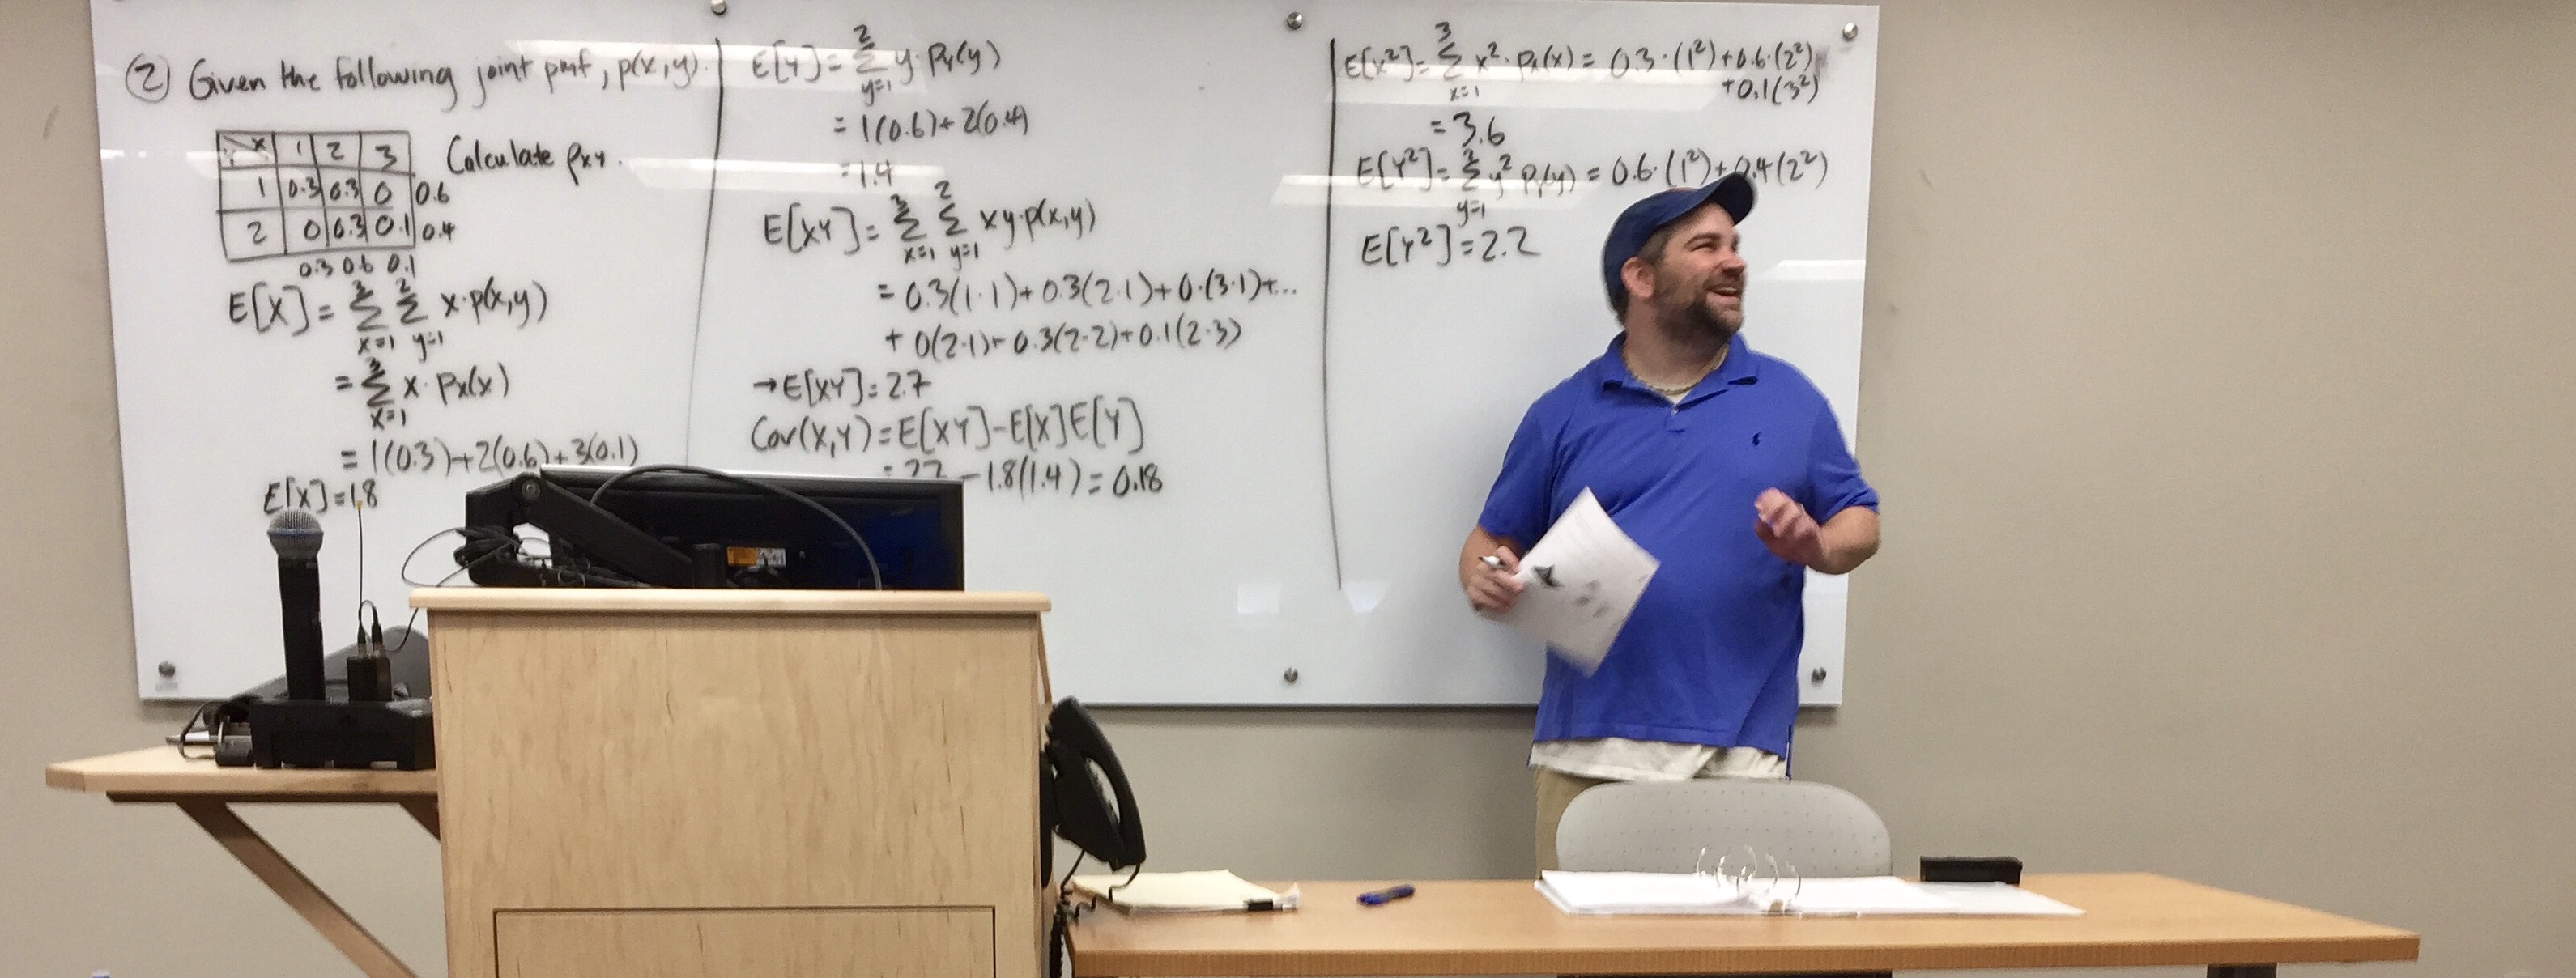 Teaching during my first year as a faculty member at CSU (2018)